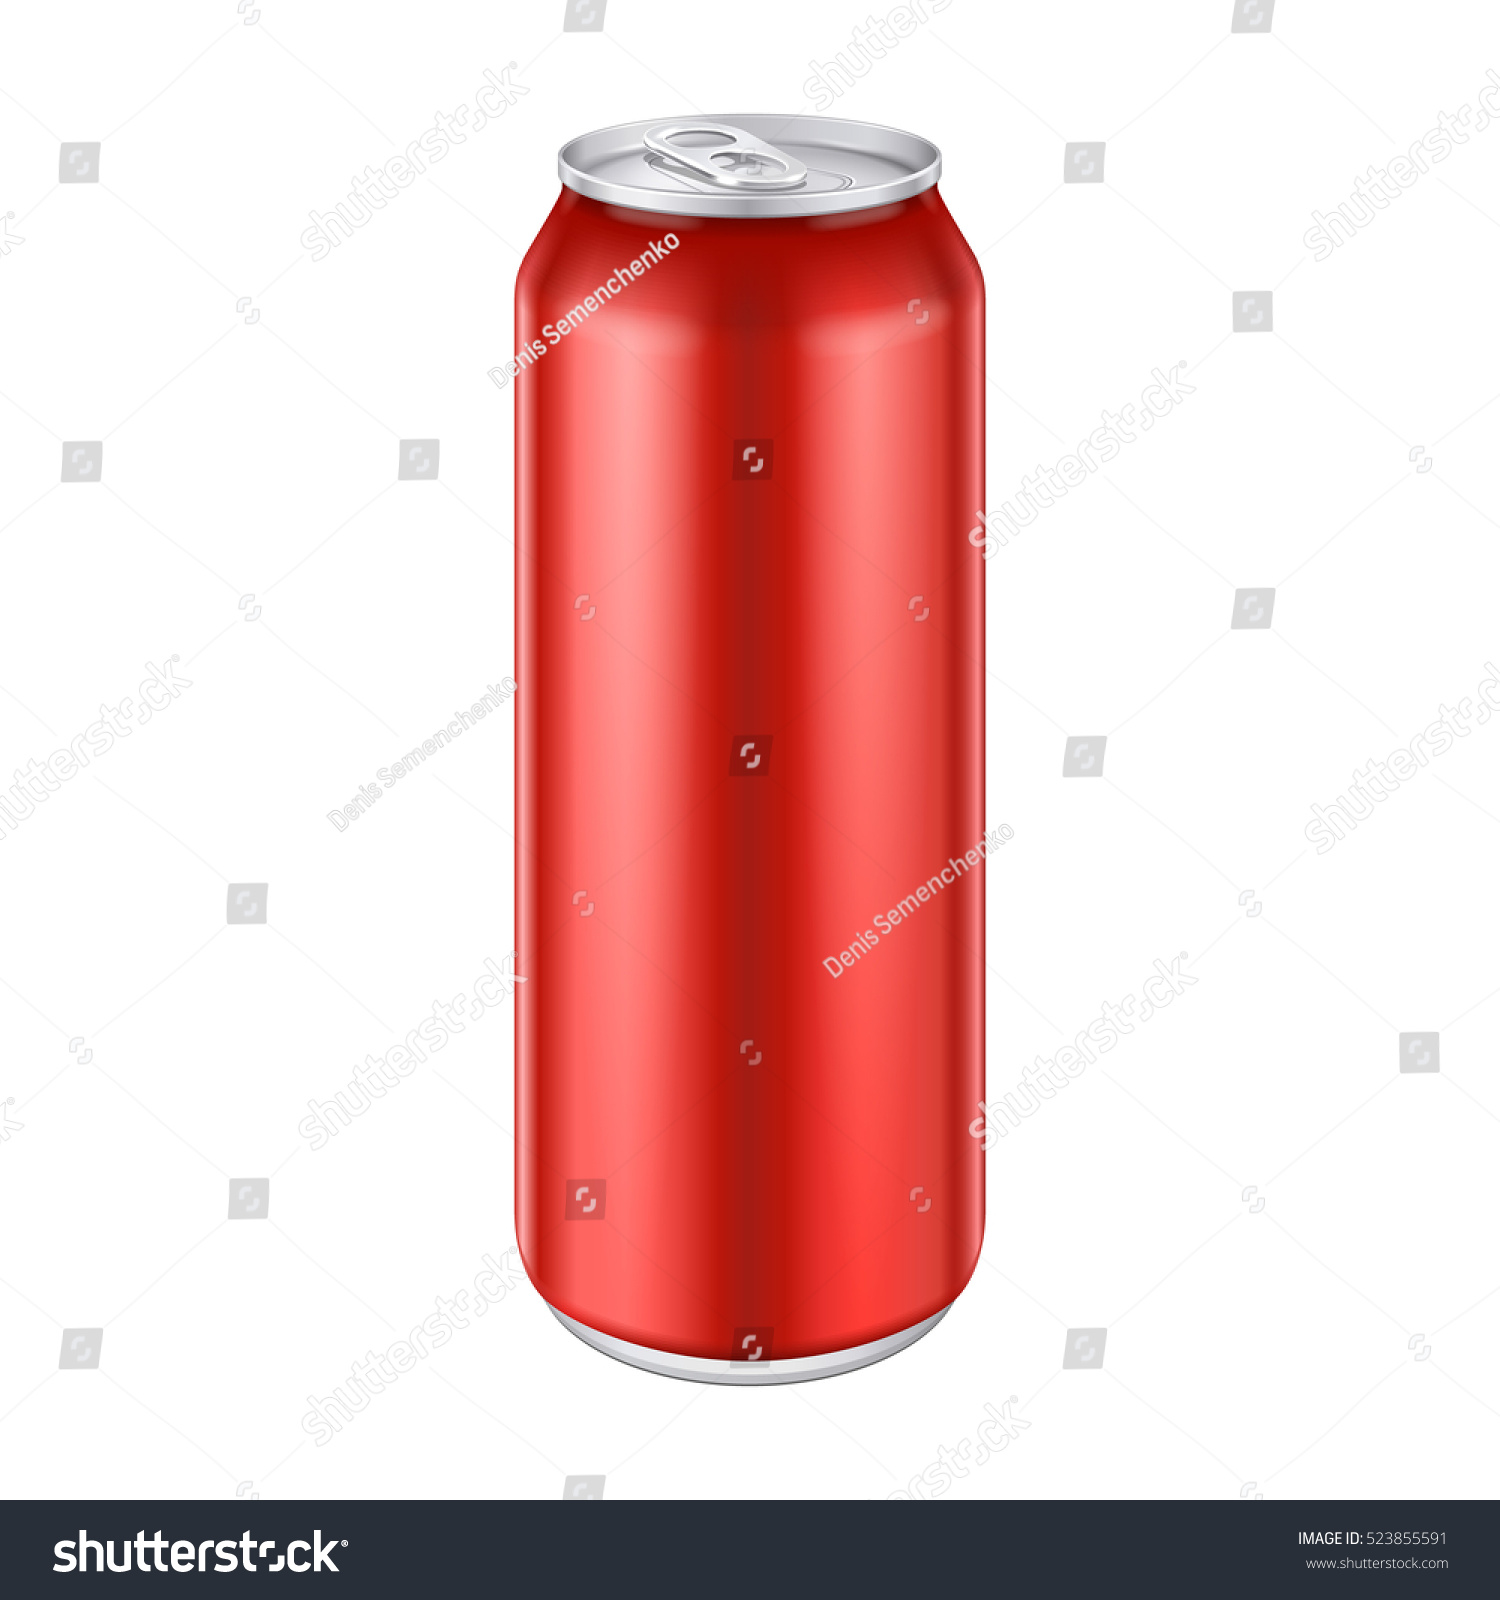 SVG of Red Metal Aluminum Beverage Drink Can 500ml, 0,5L. Mockup Template Ready For Your Design. Isolated On White Background. Product Packing. Vector EPS10 svg